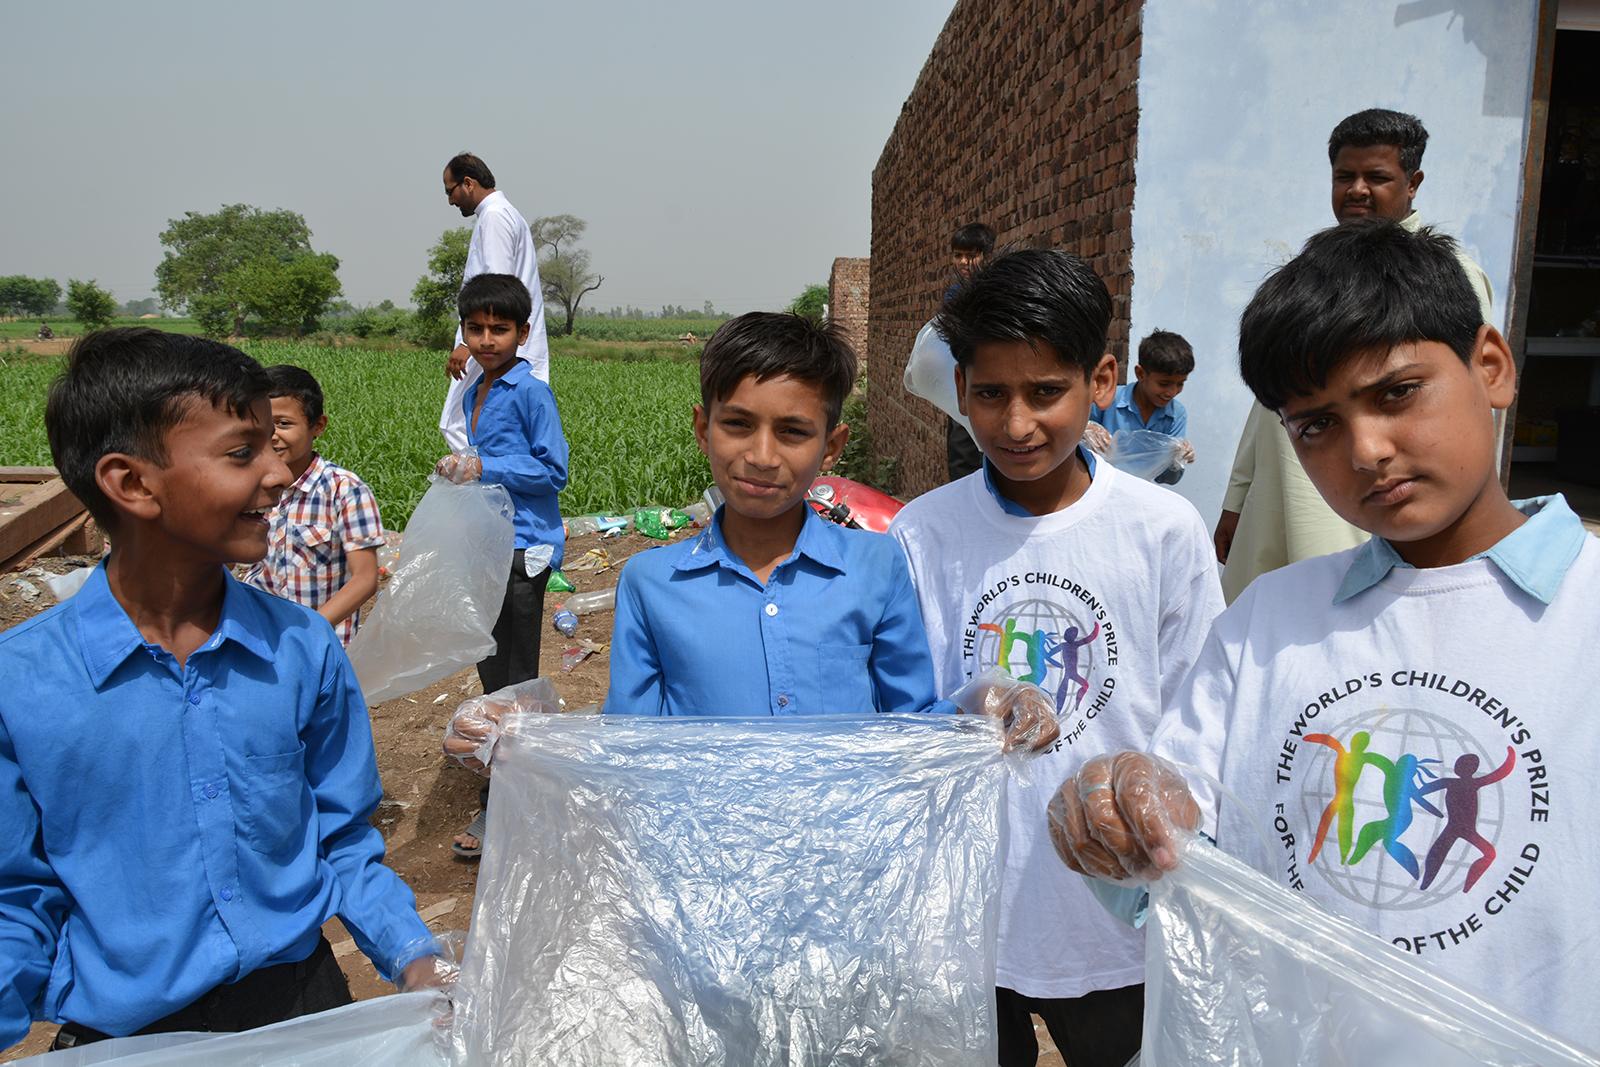 Boys looking into the camera, holding plastic bags